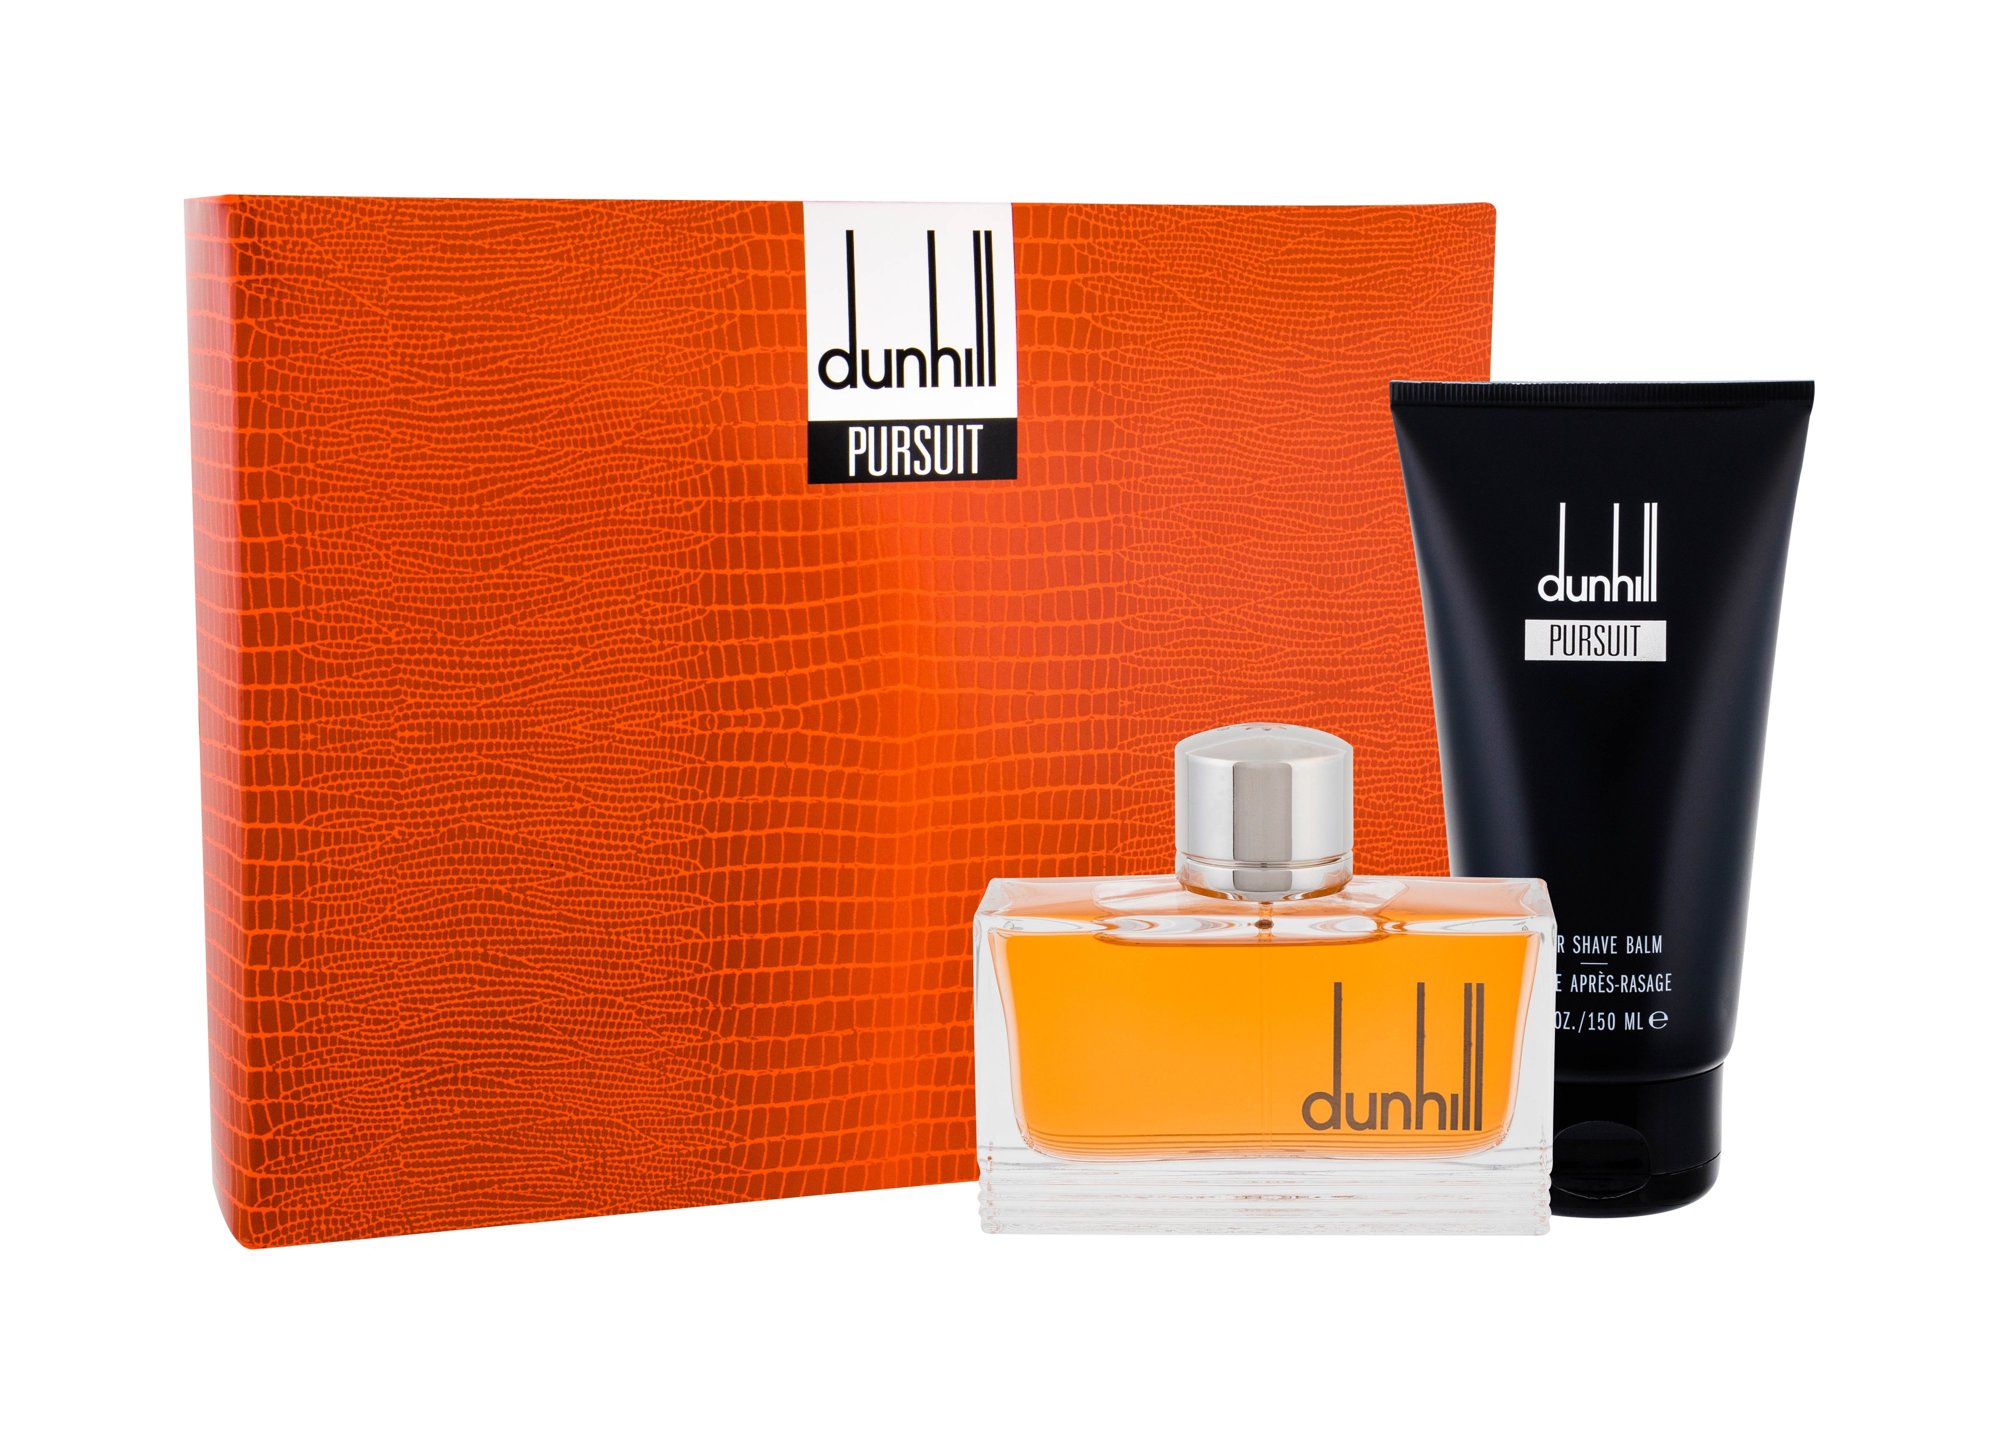 Dunhill Pursuit 75ml Edt 75 ml + After Shave Balm 150 ml Kvepalai Vyrams EDT Rinkinys